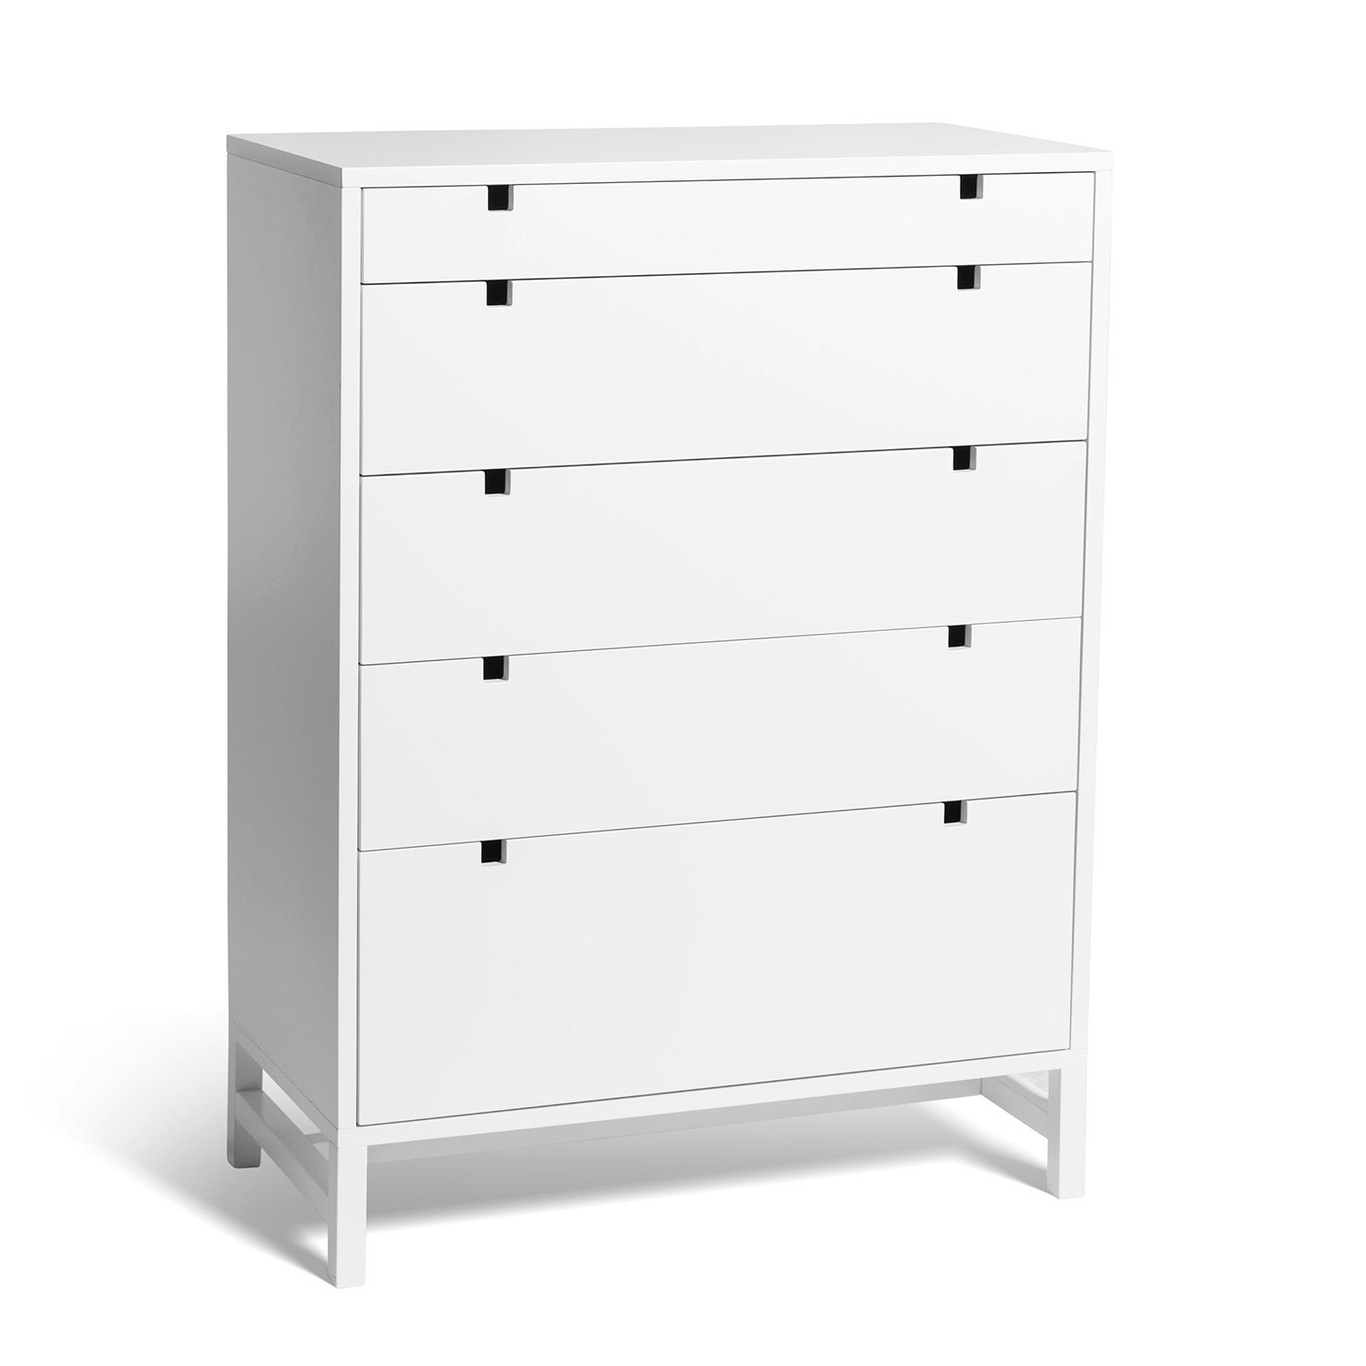 Falsterbo Chest Of Drawers Five Drawers 80x40x108 cm, White